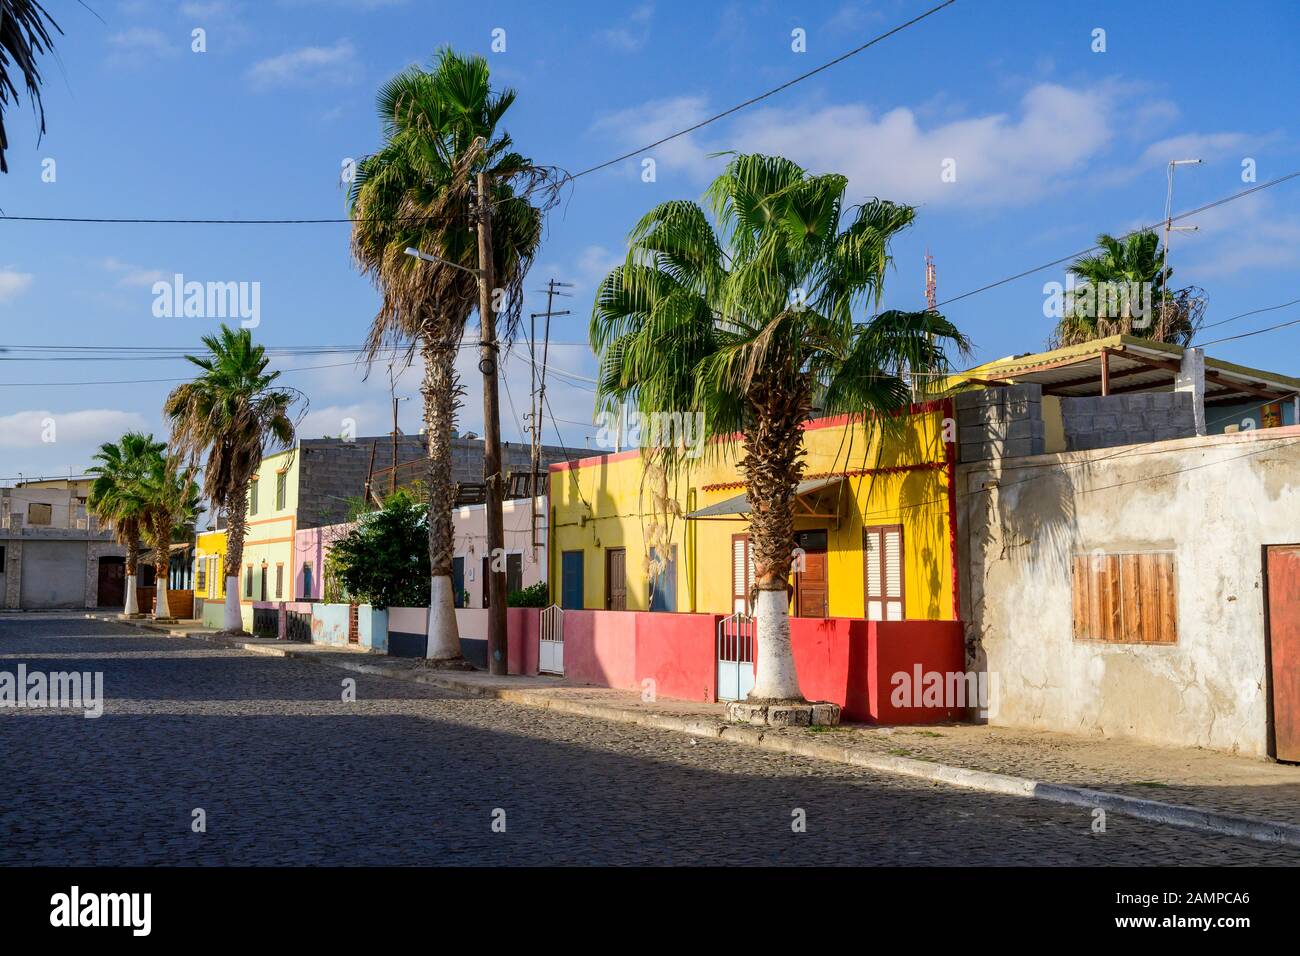 Colorful houses and palm trees on a street, Palmeira, Sal Island, Cape Verde Stock Photo